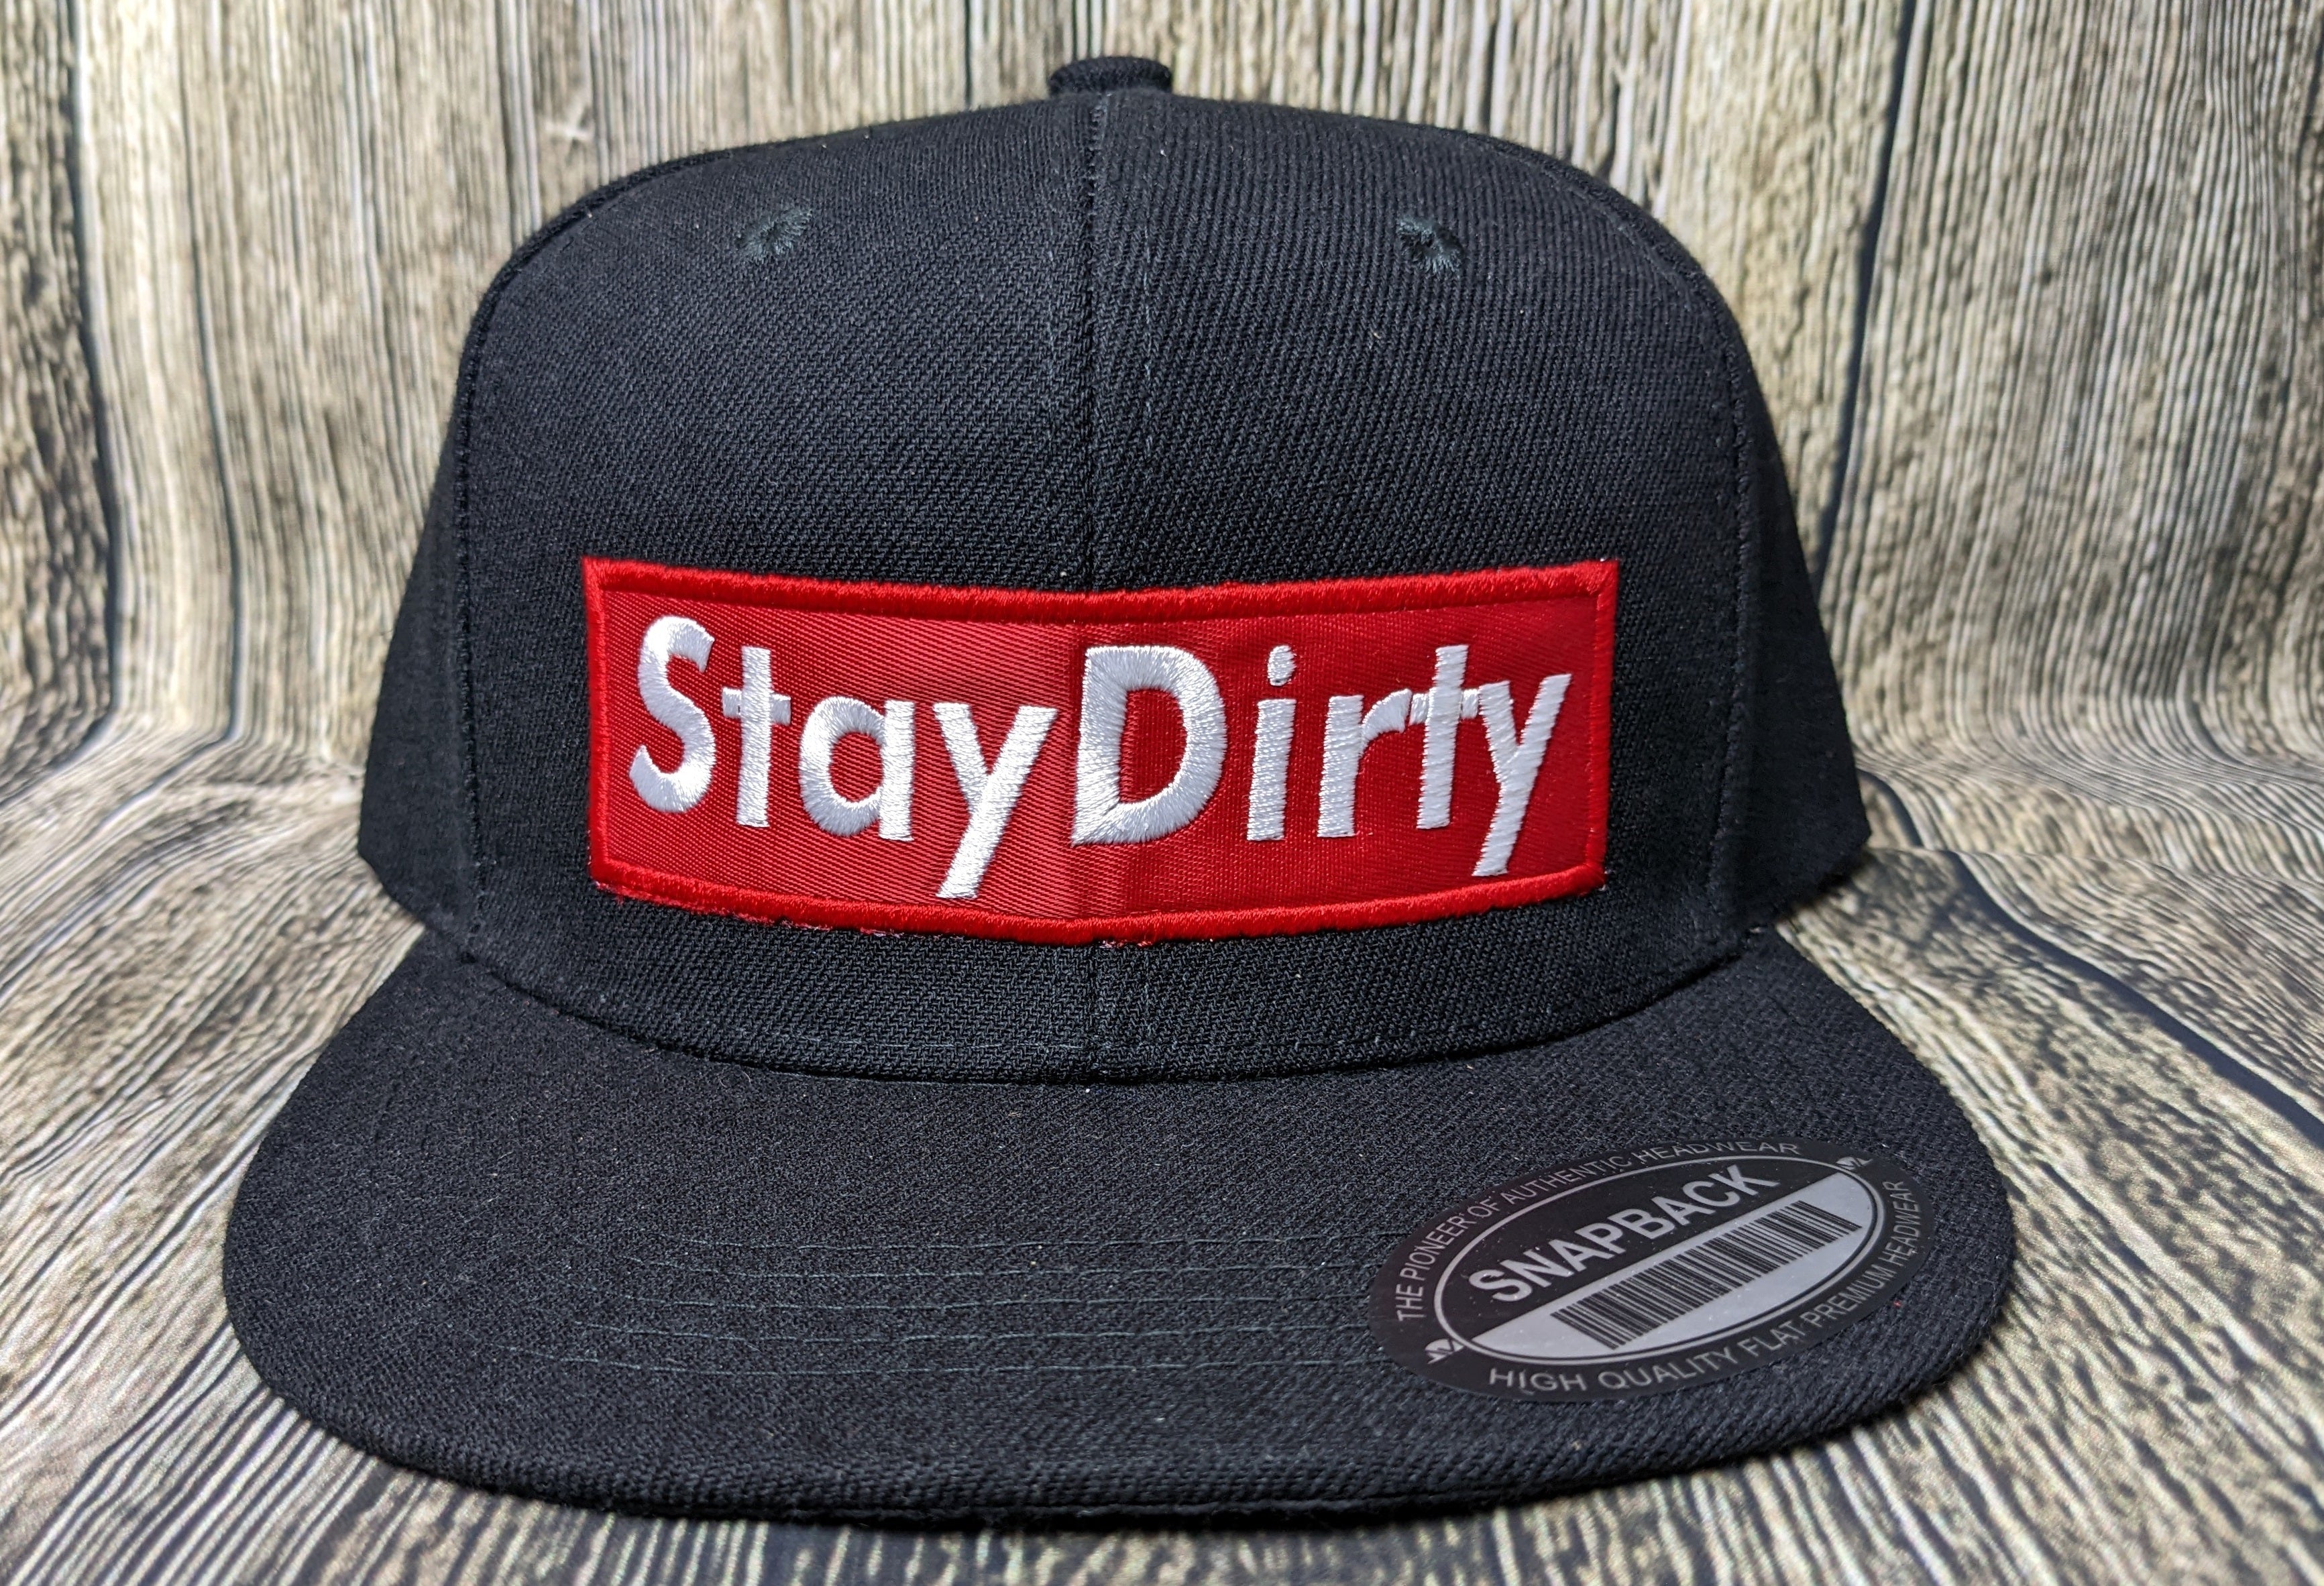 Stay Dirty - Black/Red Snapback Hat